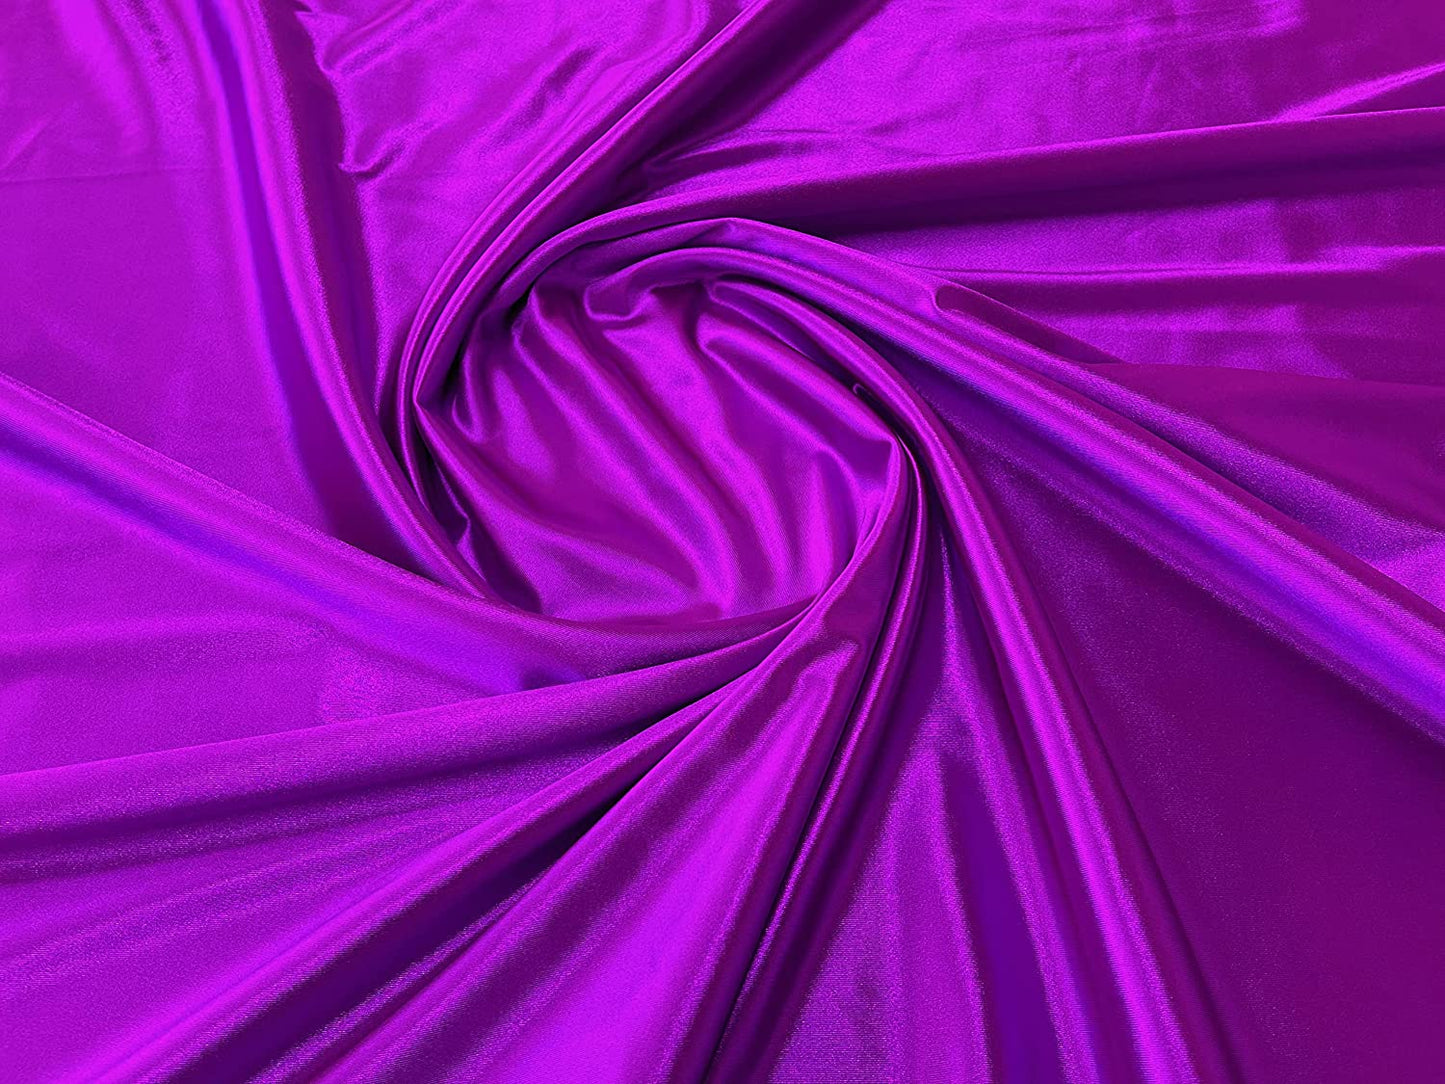 Deluxe Shiny Polyester Spandex Stretch Fabric (1 Yard, Violet)